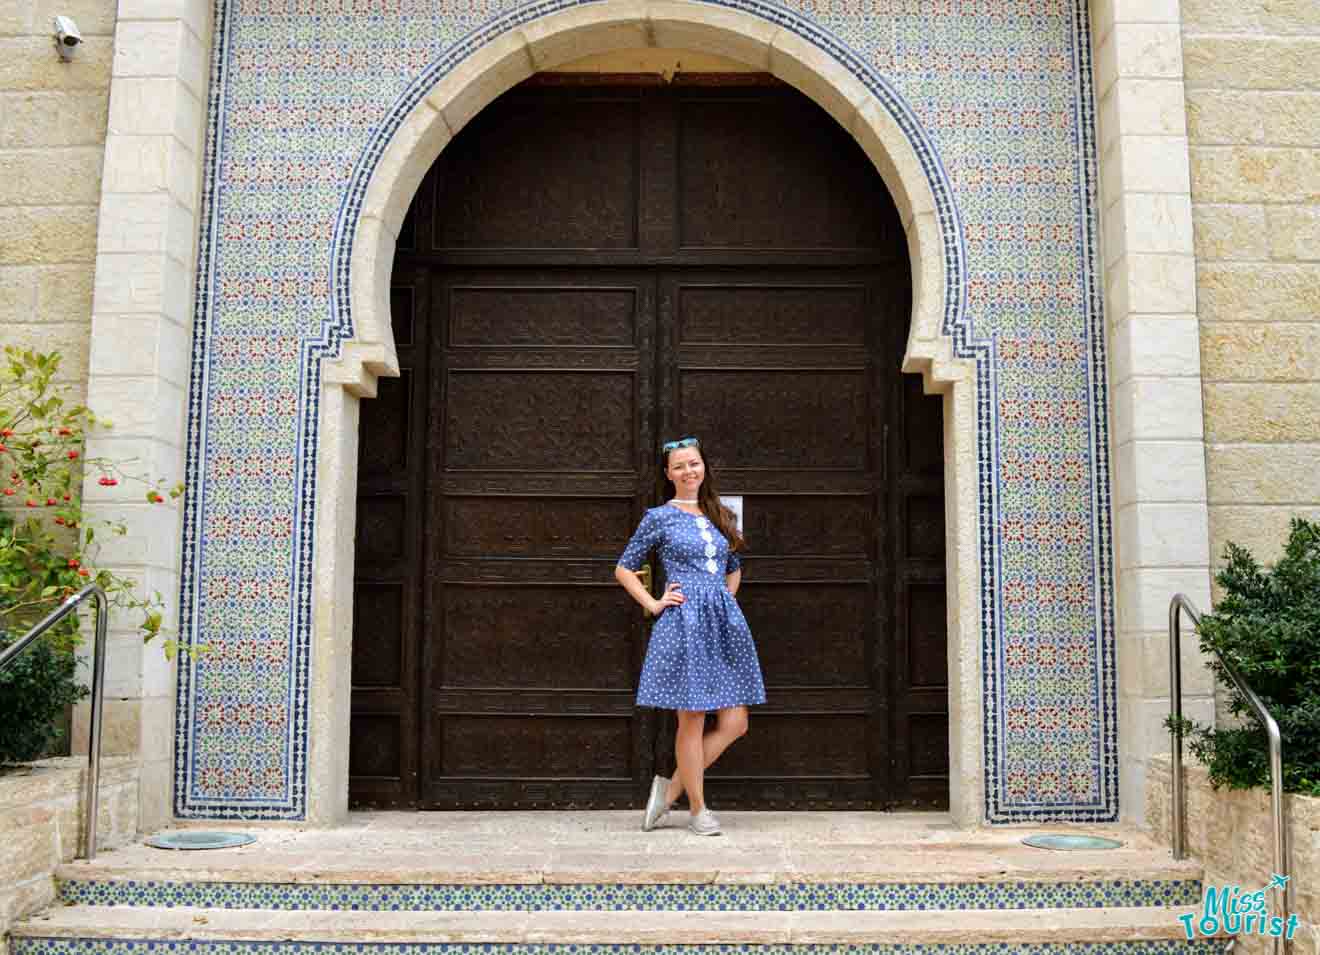 The author of this post posing in front of a traditional door with intricate blue and white tilework, exuding historic charm.